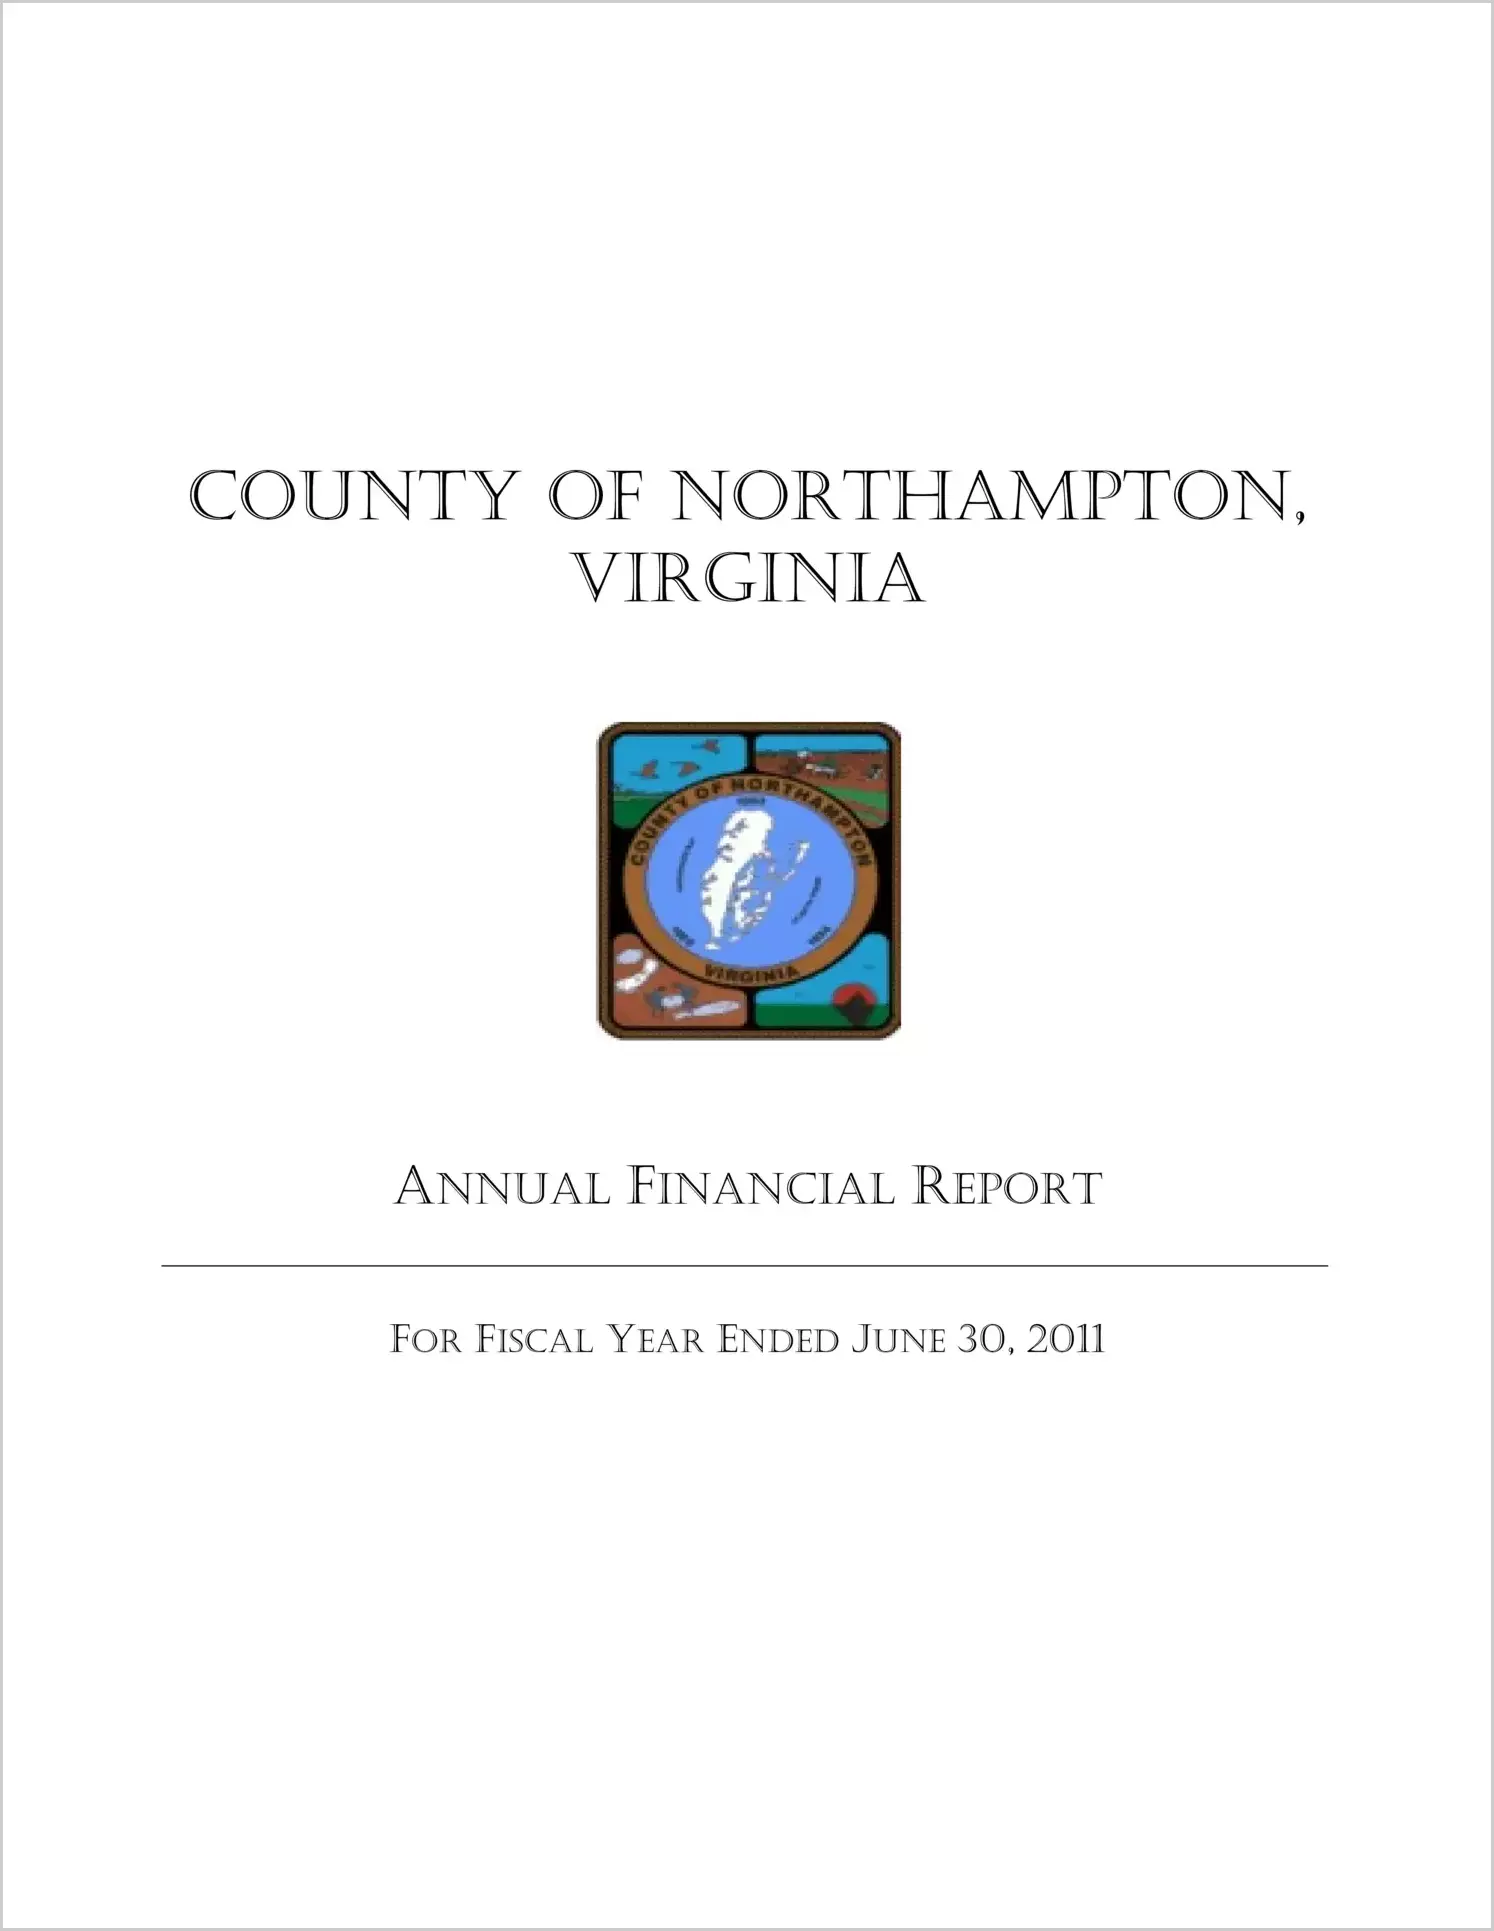 2010 Annual Financial Report for County of Northampton